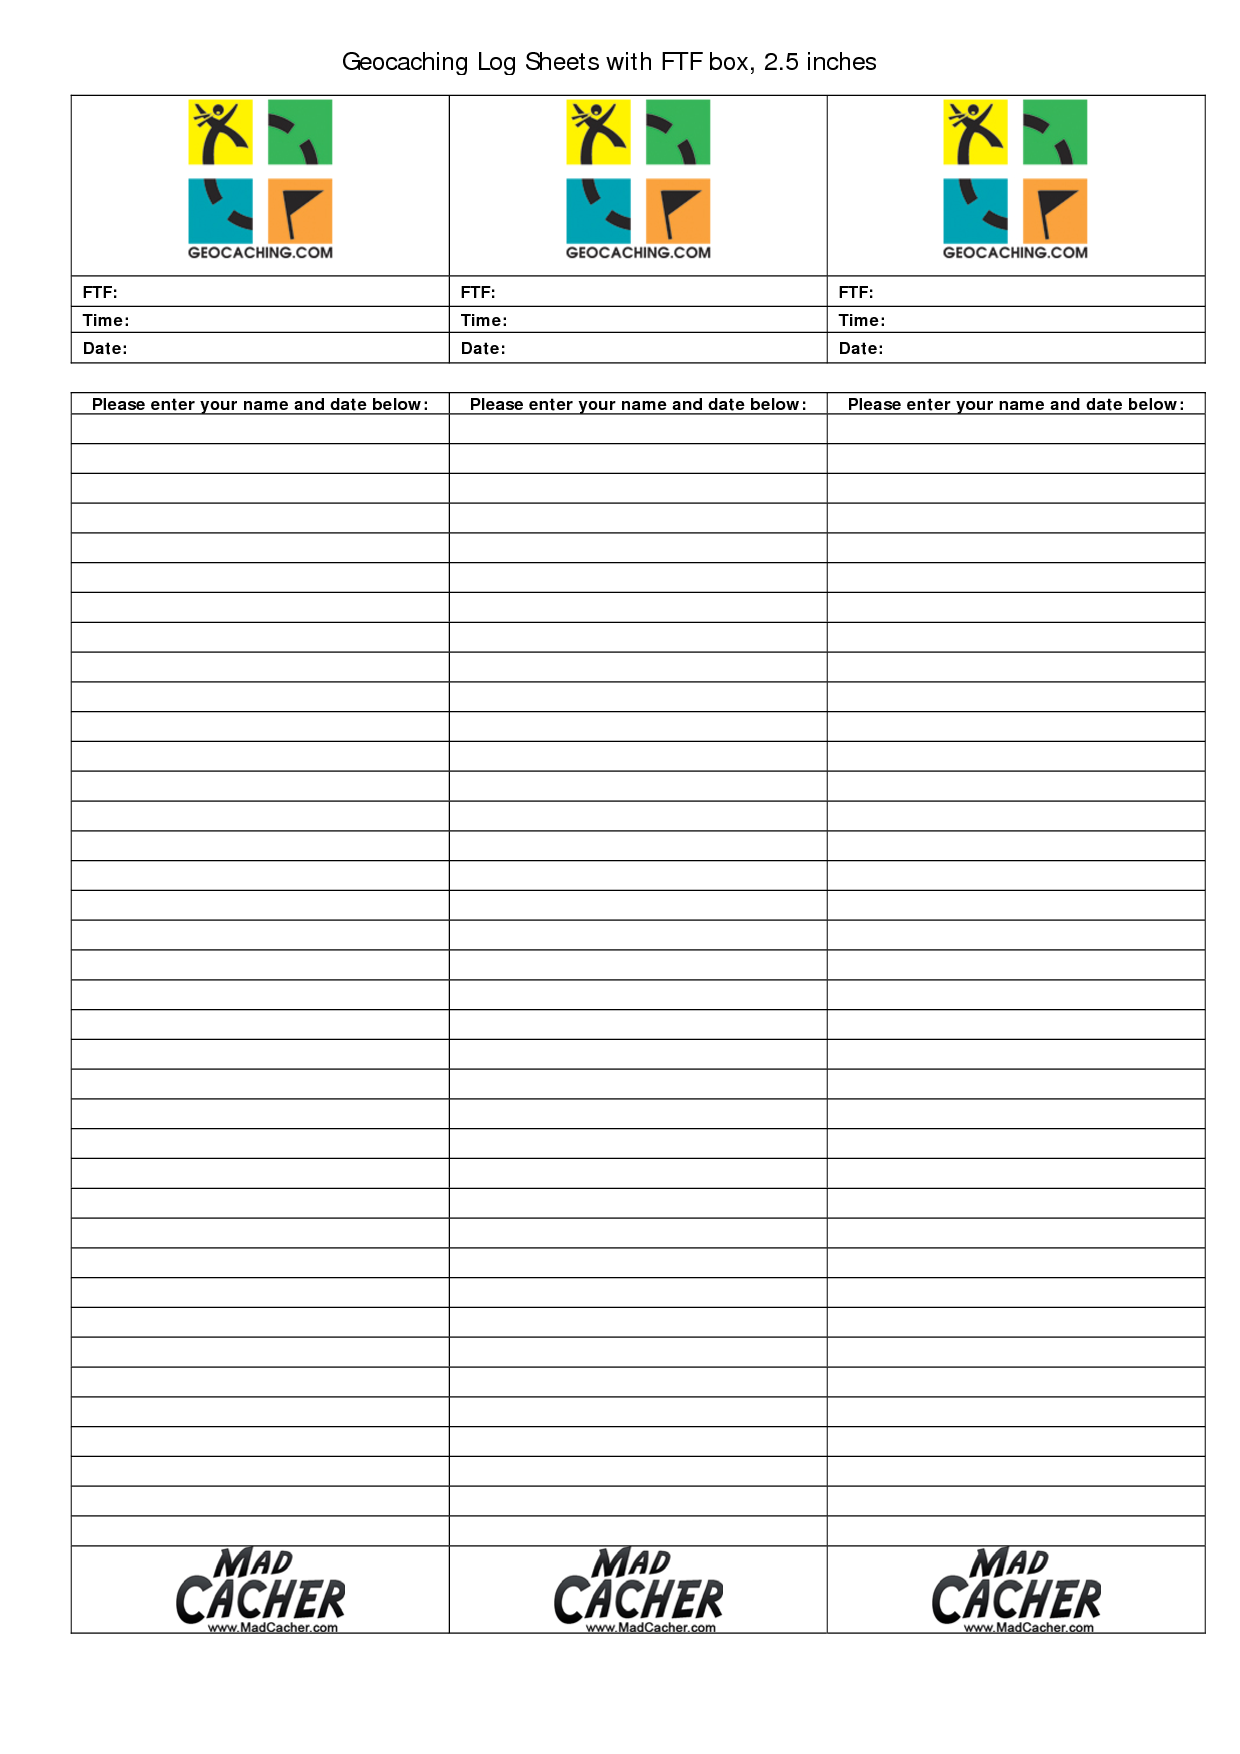 Printable Geocaching Log Sheet Geocaching Geocaching Containers Printables